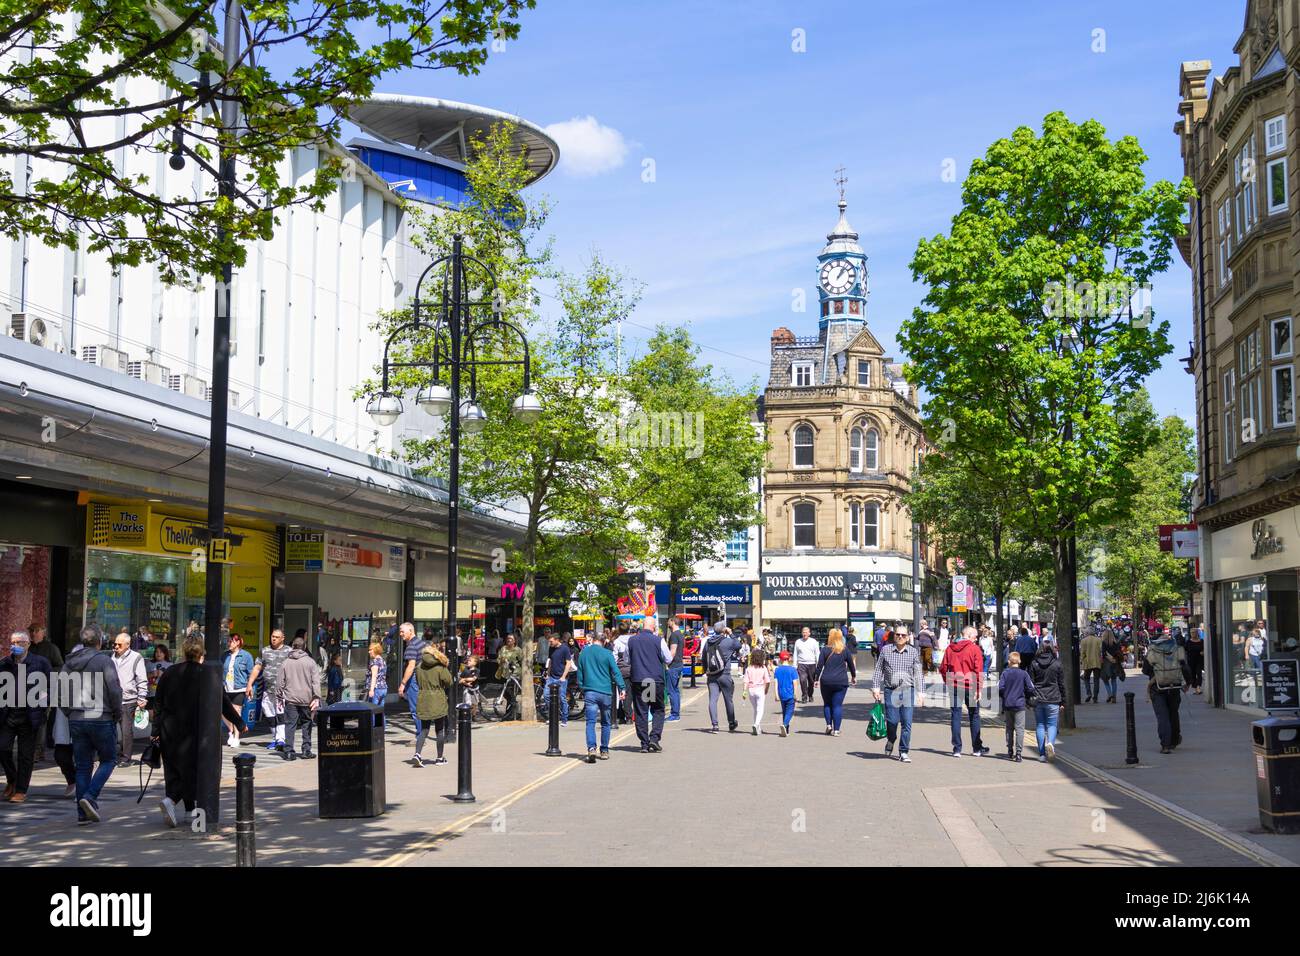 Doncaster frenchgate shopping centre and shoppers on St Sepulchre Gate in the town centre of Doncaster South Yorkshire England  UK GB Europe Stock Photo